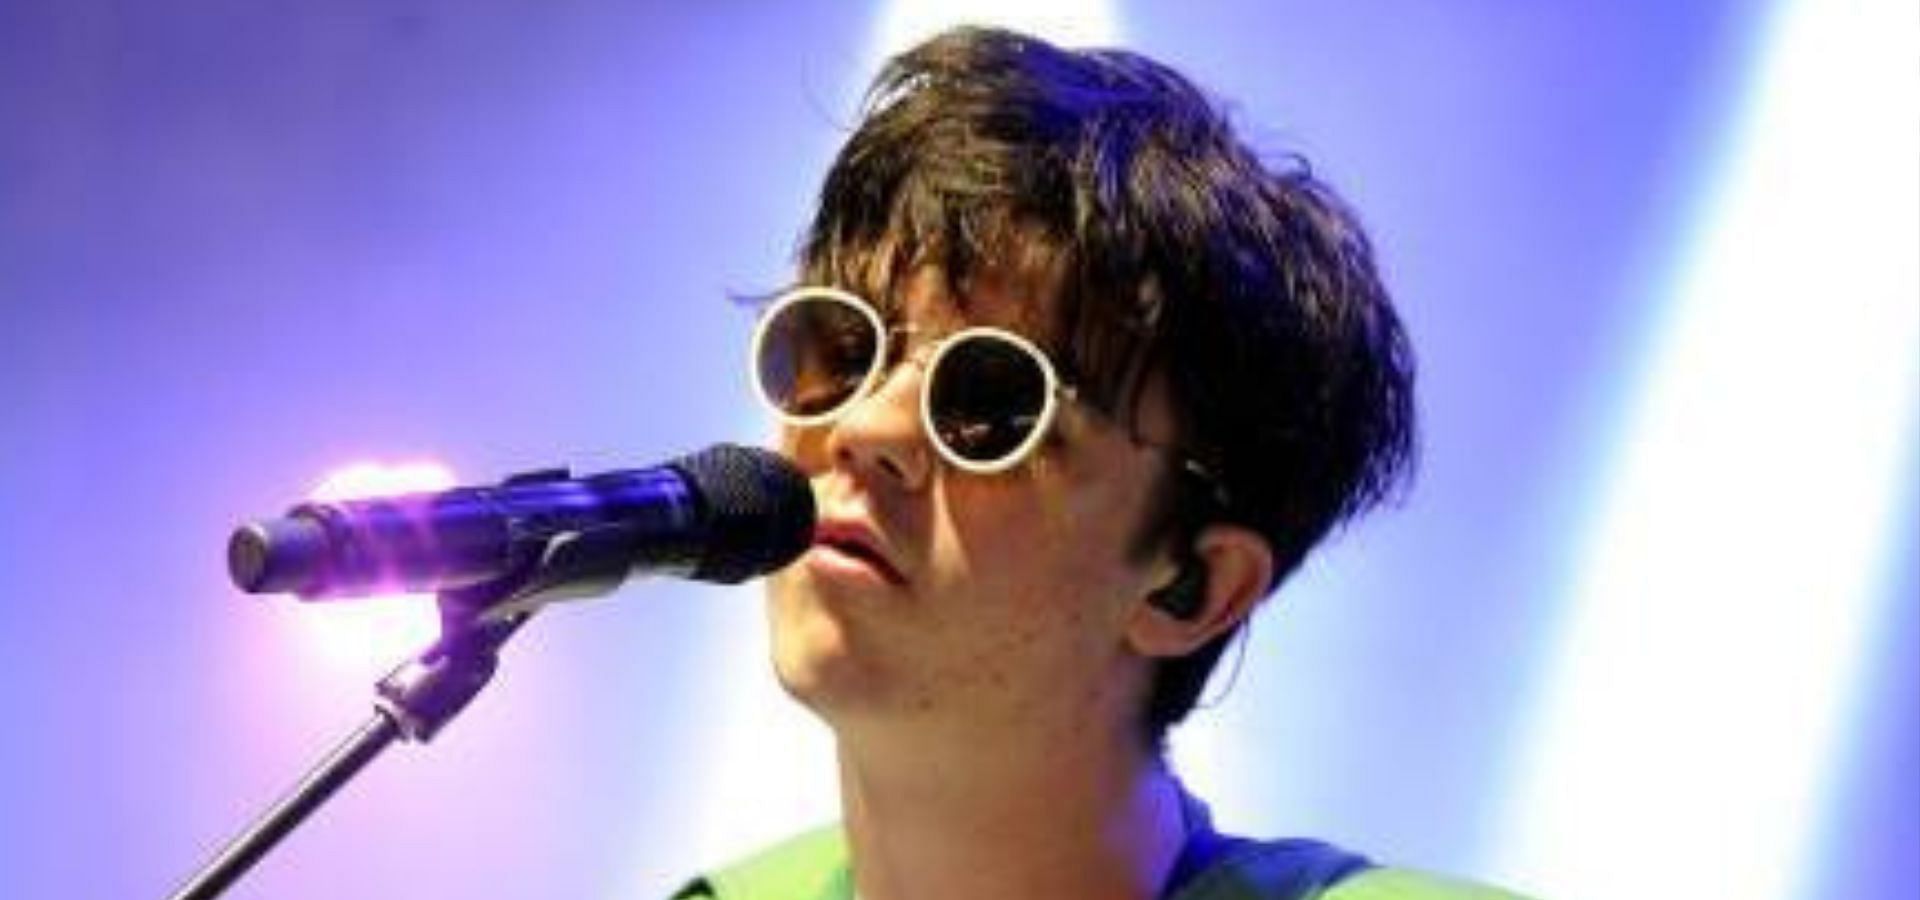 Declan Mckenna Tour 2023 Tickets, Presale, where to buy, dates and venues